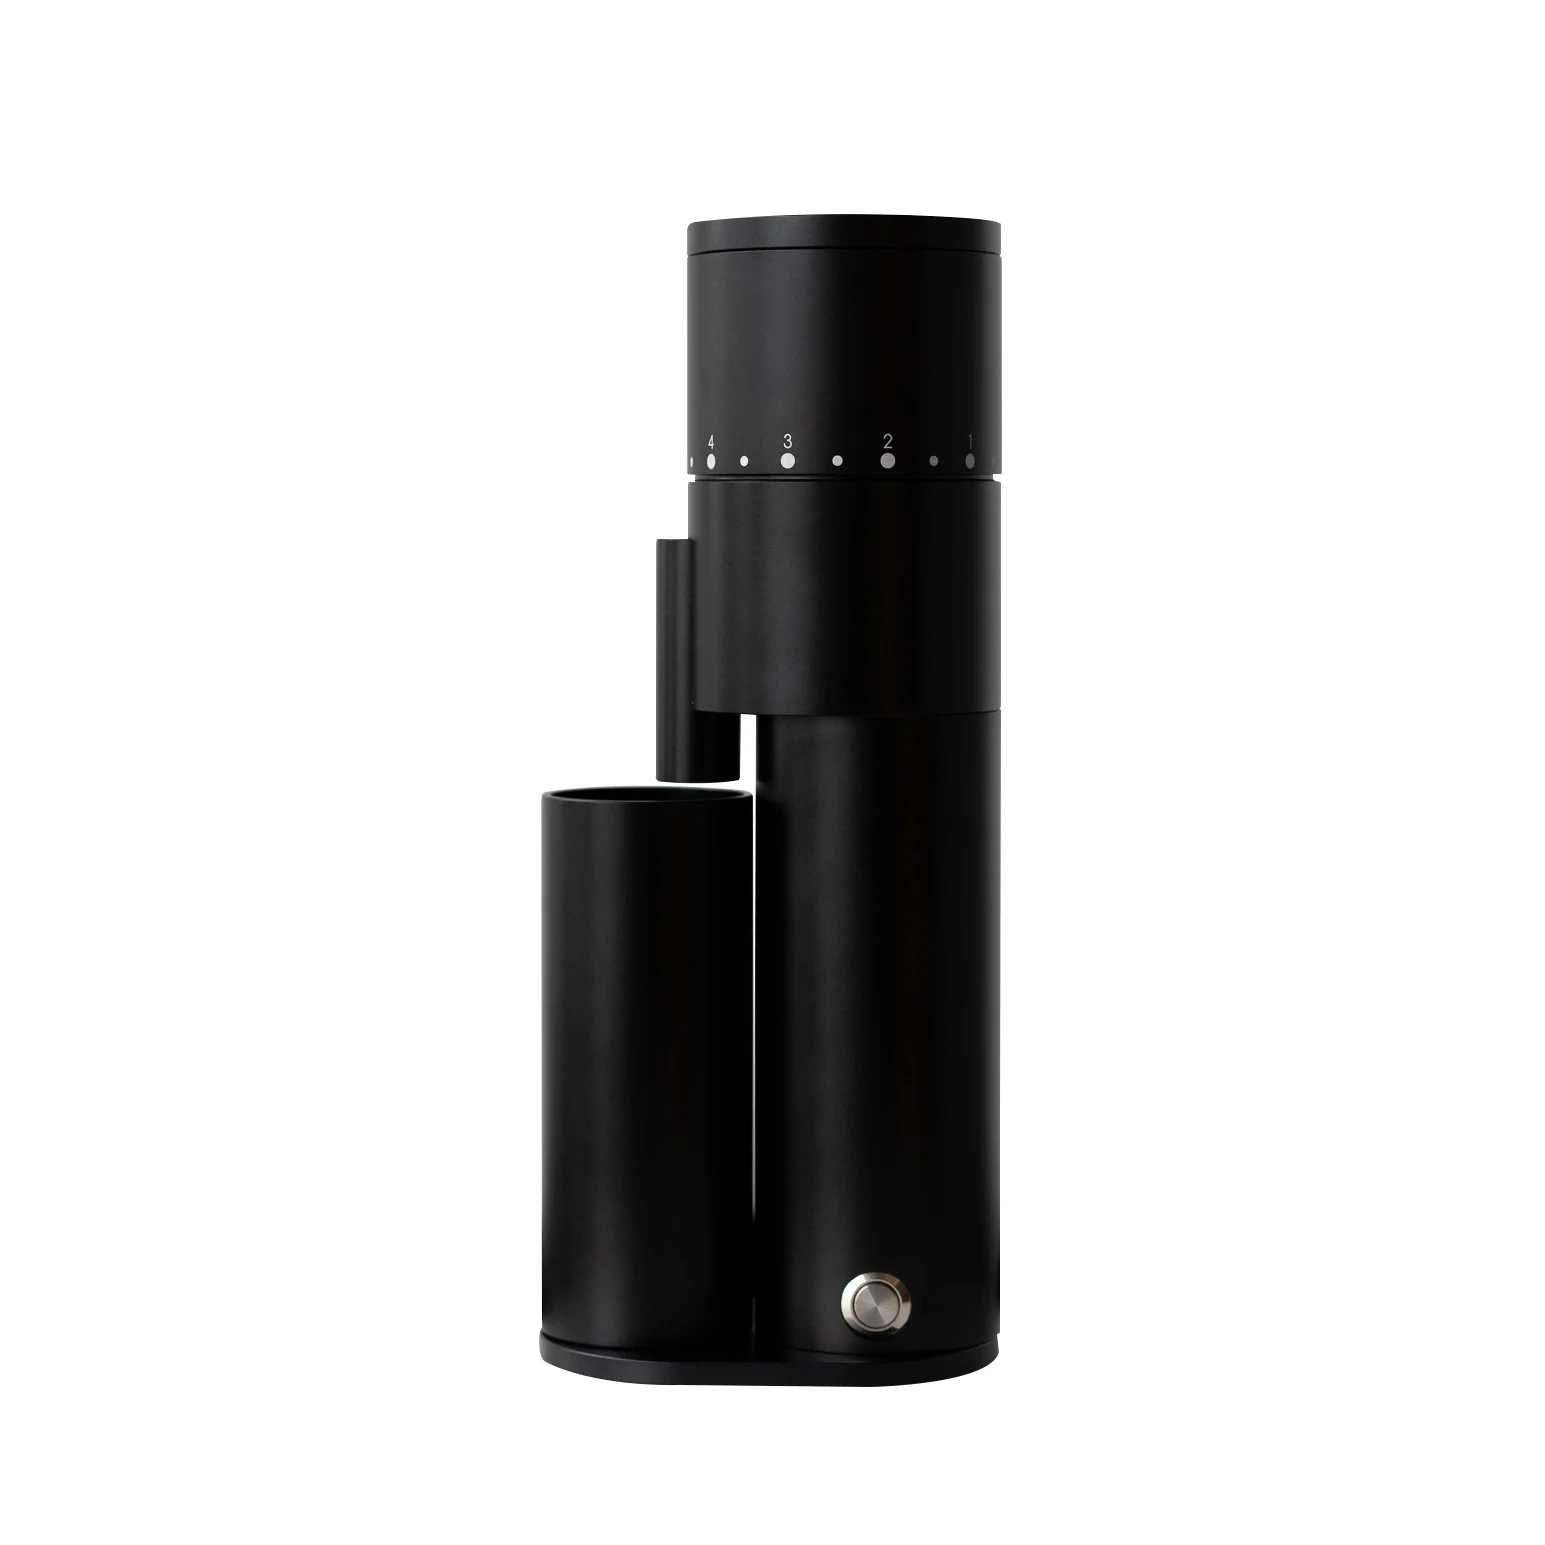 

Mini Electric Espresso Coffee Grinder, Conical Burr, Stainless Steel, Portable, Tin Coated, Single Use, 38mm